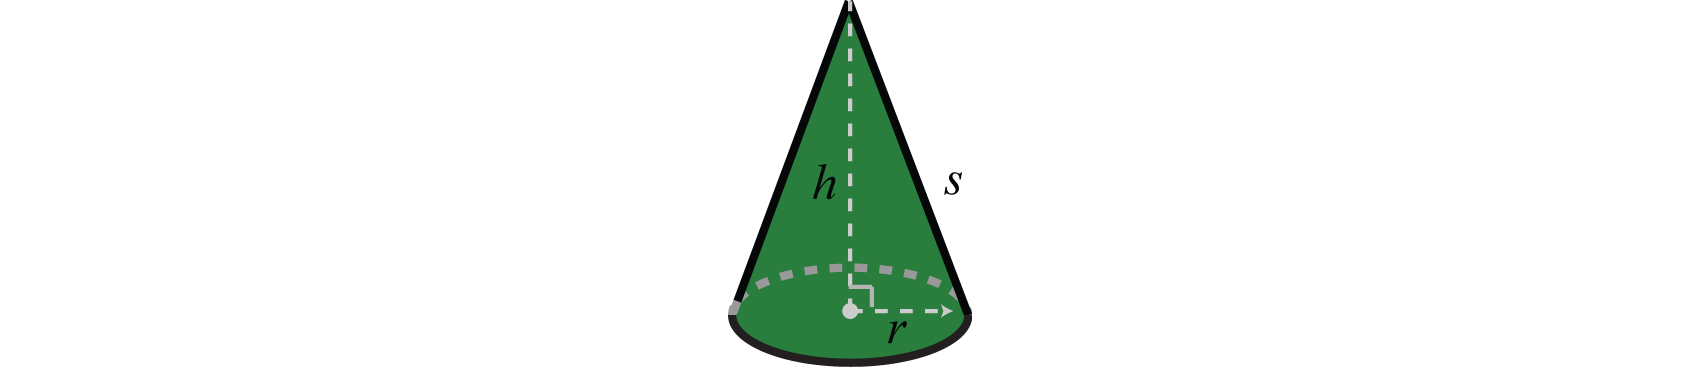 Image of a cone with height h, radius r, and side length s.